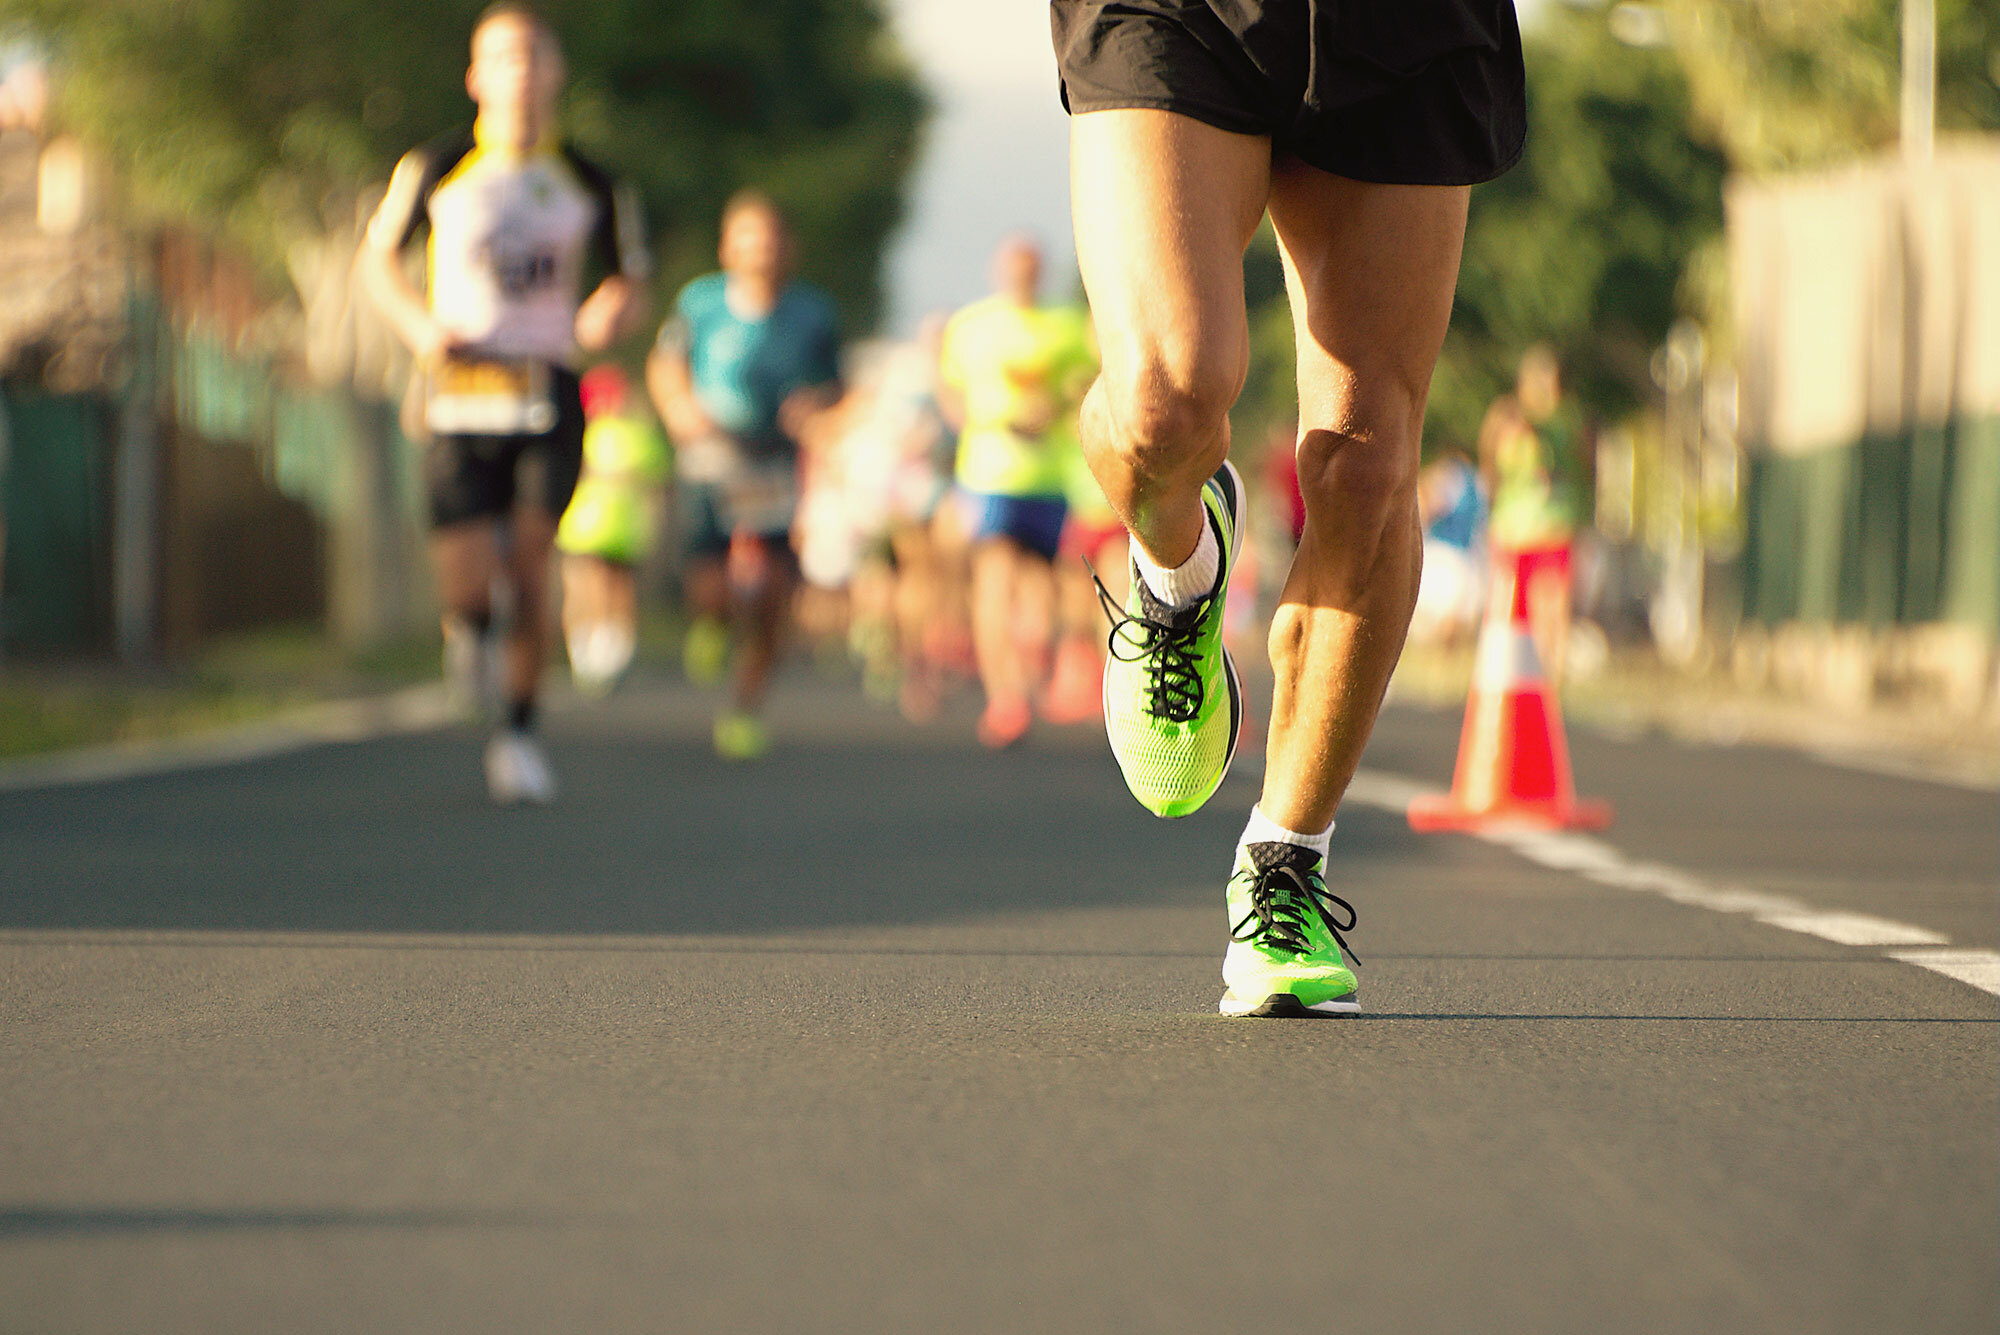 Why you must keep going when the finish line is out of sight